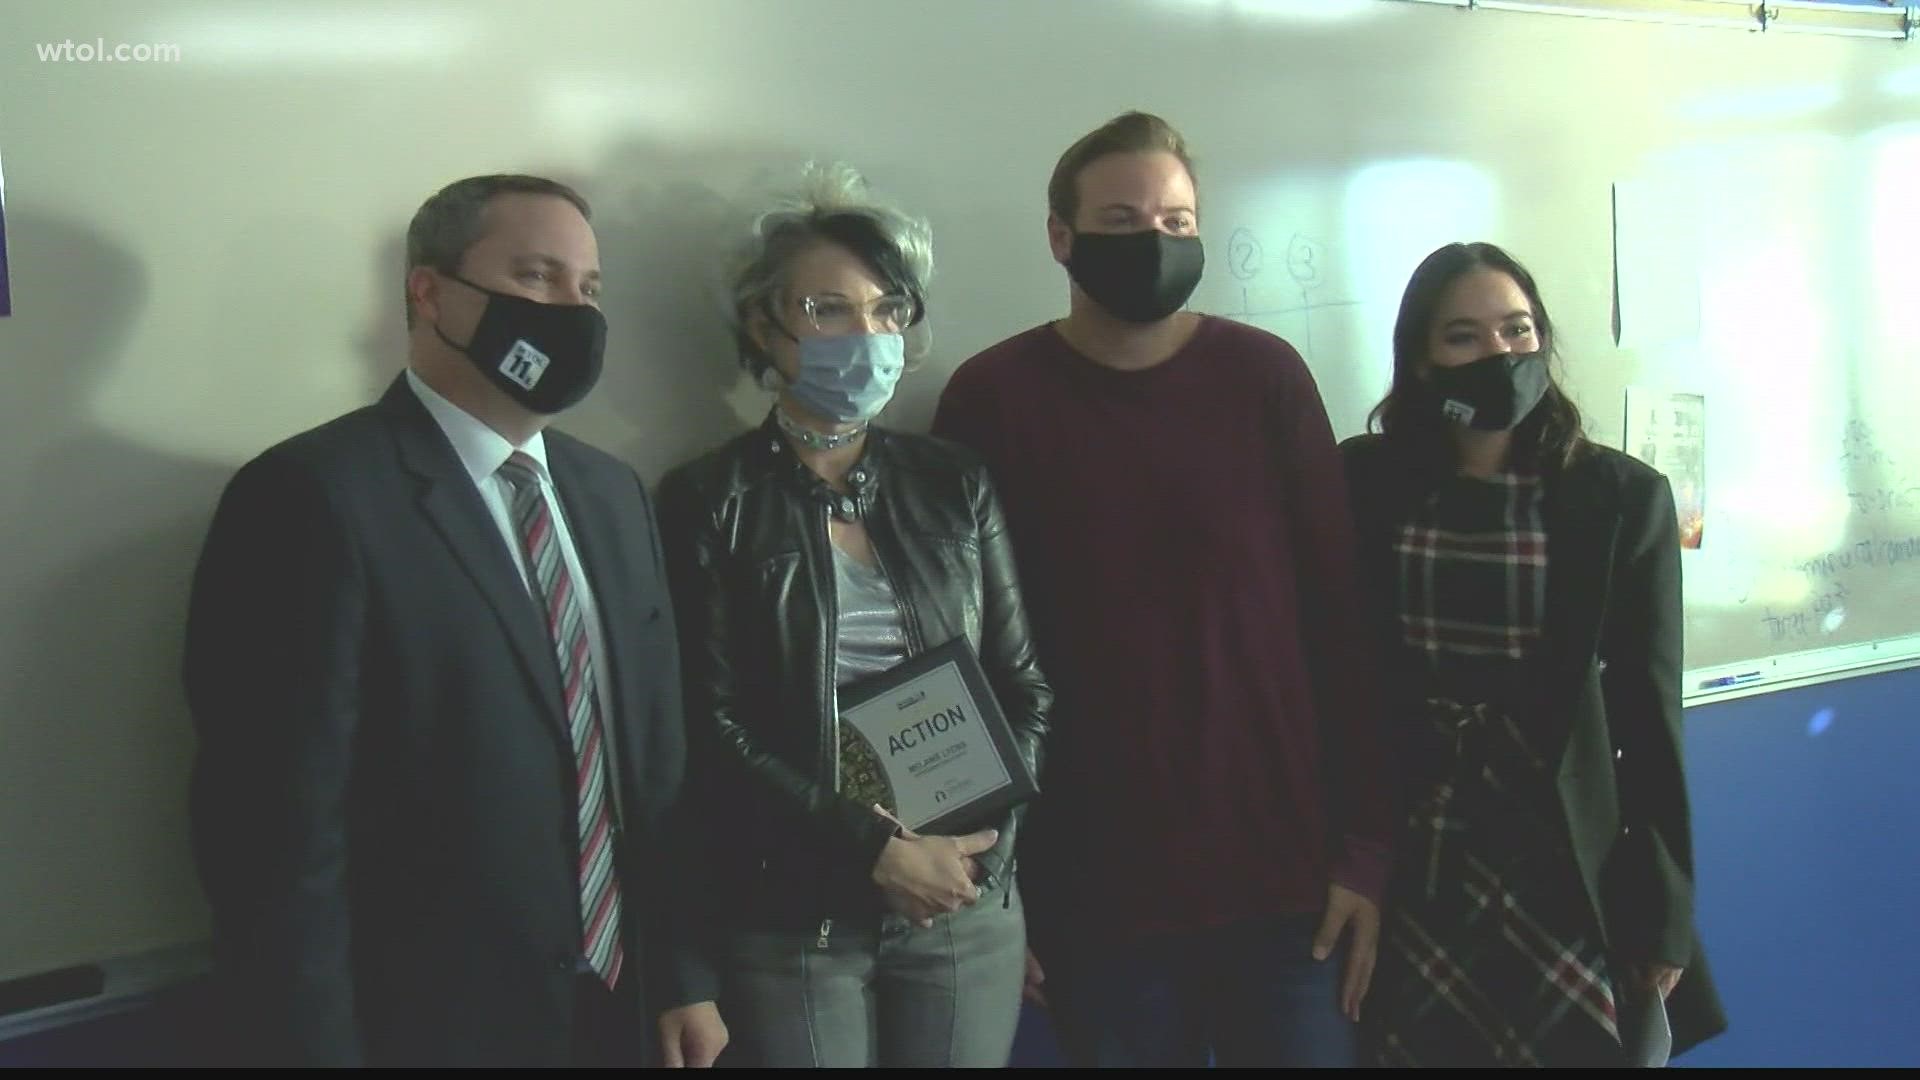 Perrysburg High School Spanish teacher Melanie Lyons was nominated by a student who said she went above and beyond to prioritize his learning during the pandemic.